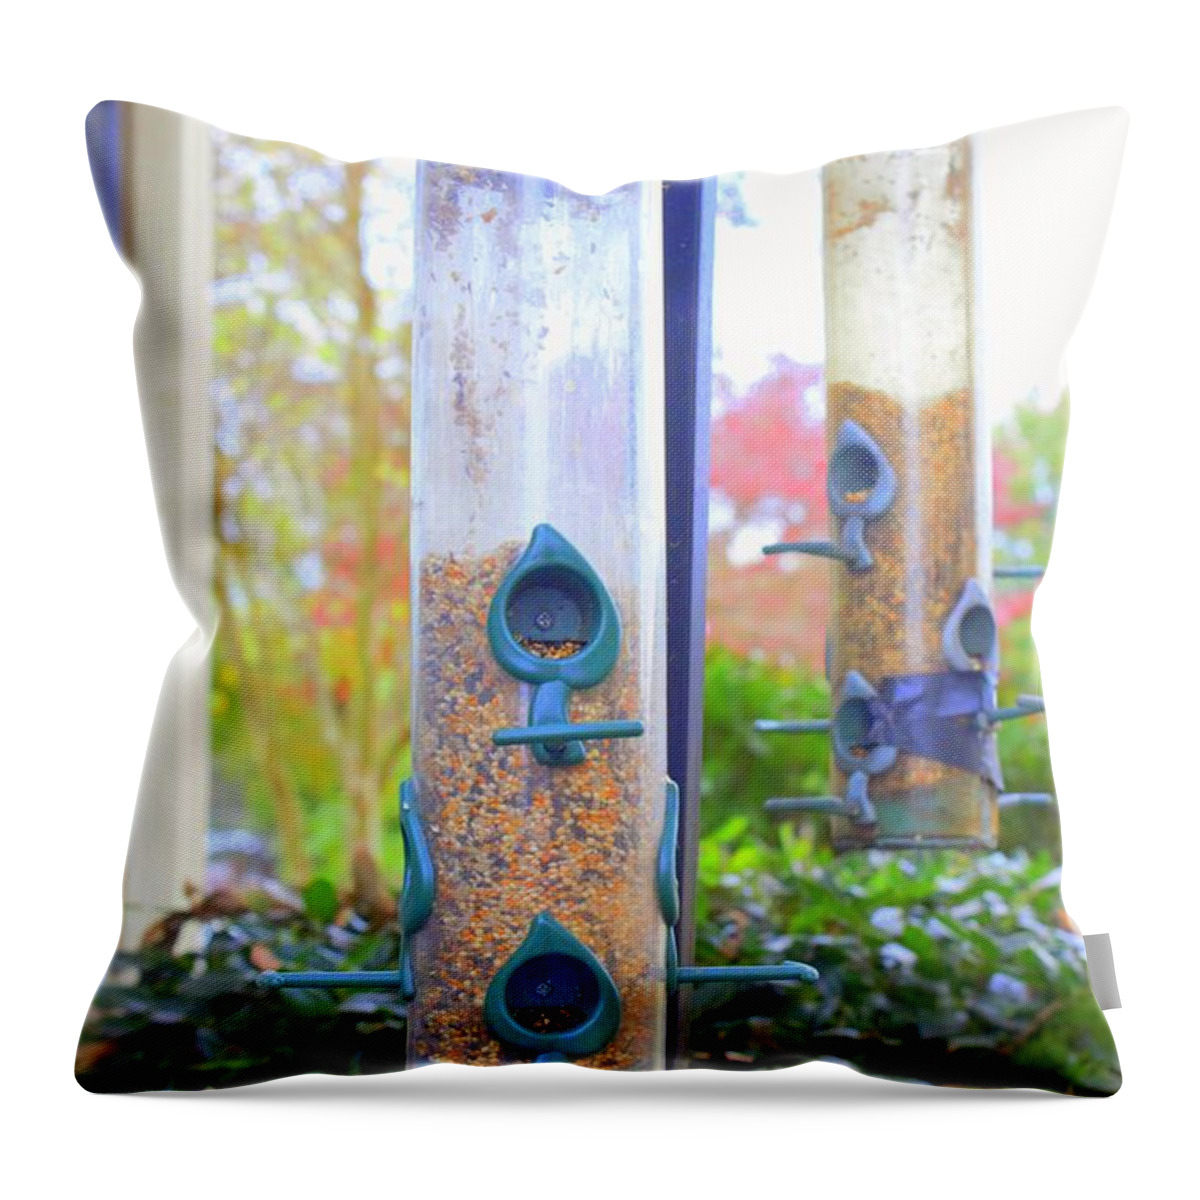 Saturation Filter Throw Pillow featuring the photograph Humming Bird Feeders 2 Saturated in Color by Ali Baucom